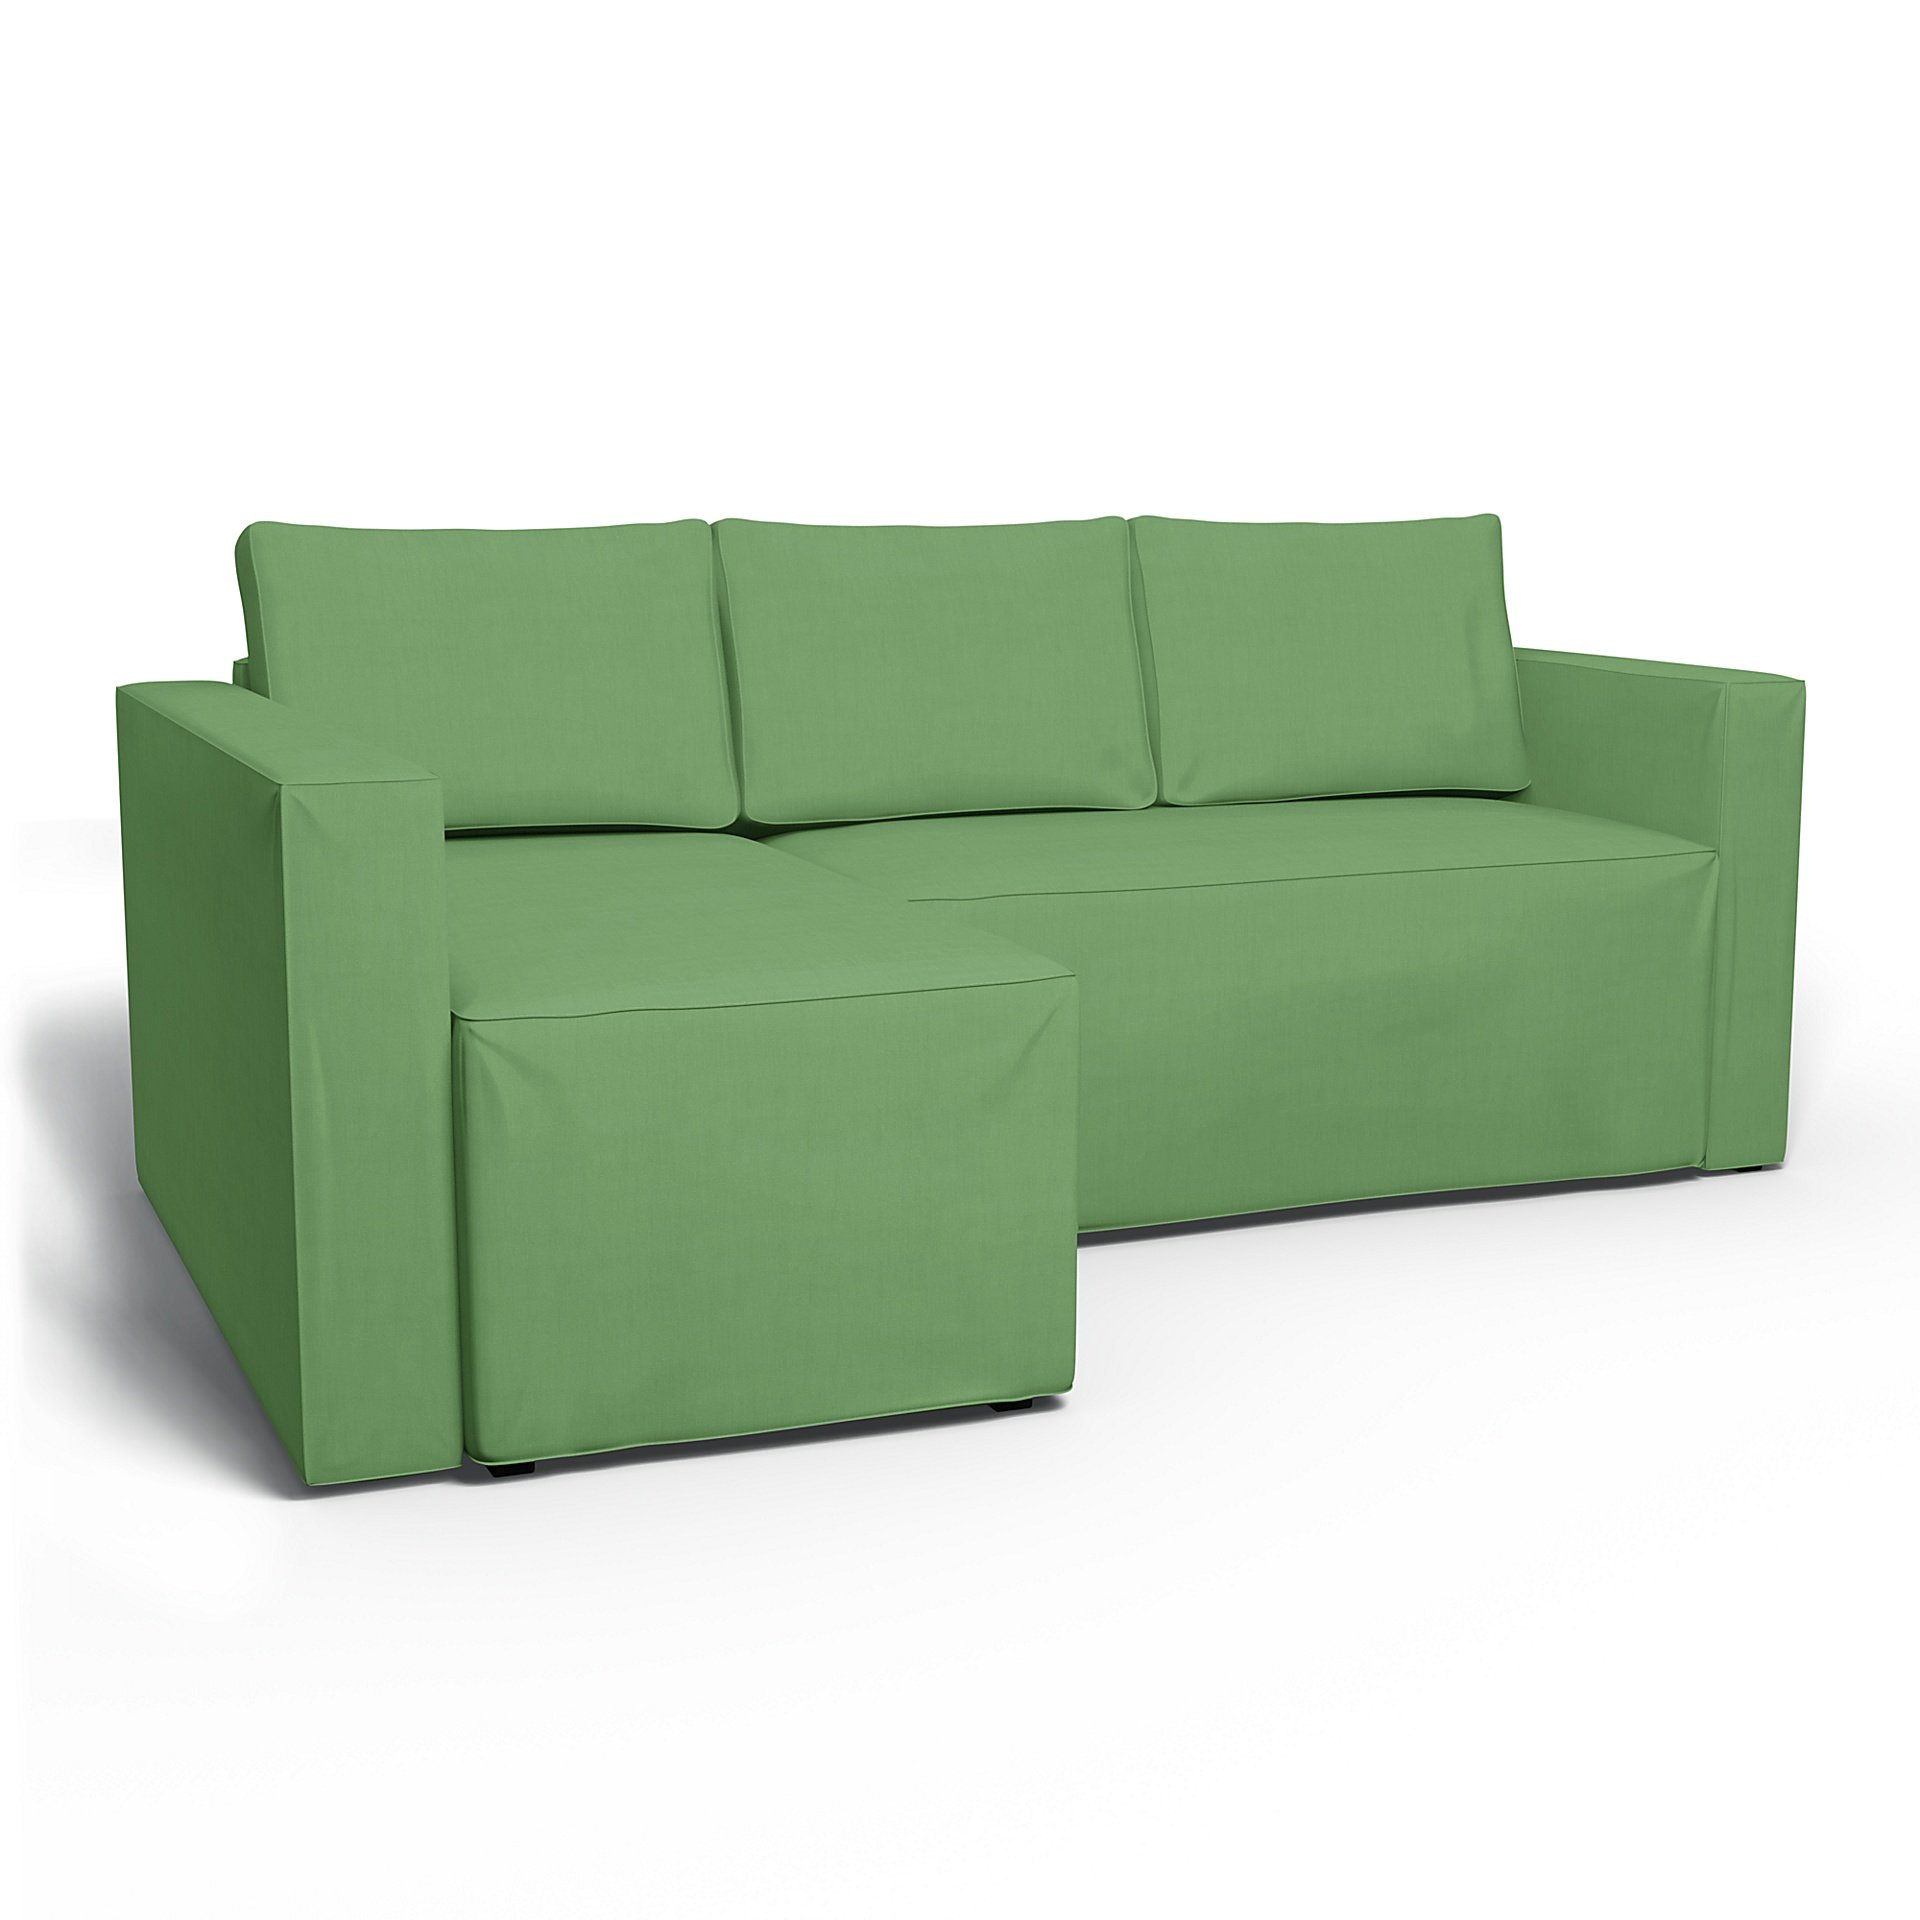 IKEA - Manstad Sofa Bed with Left Chaise Cover, Apple Green, Linen - Bemz